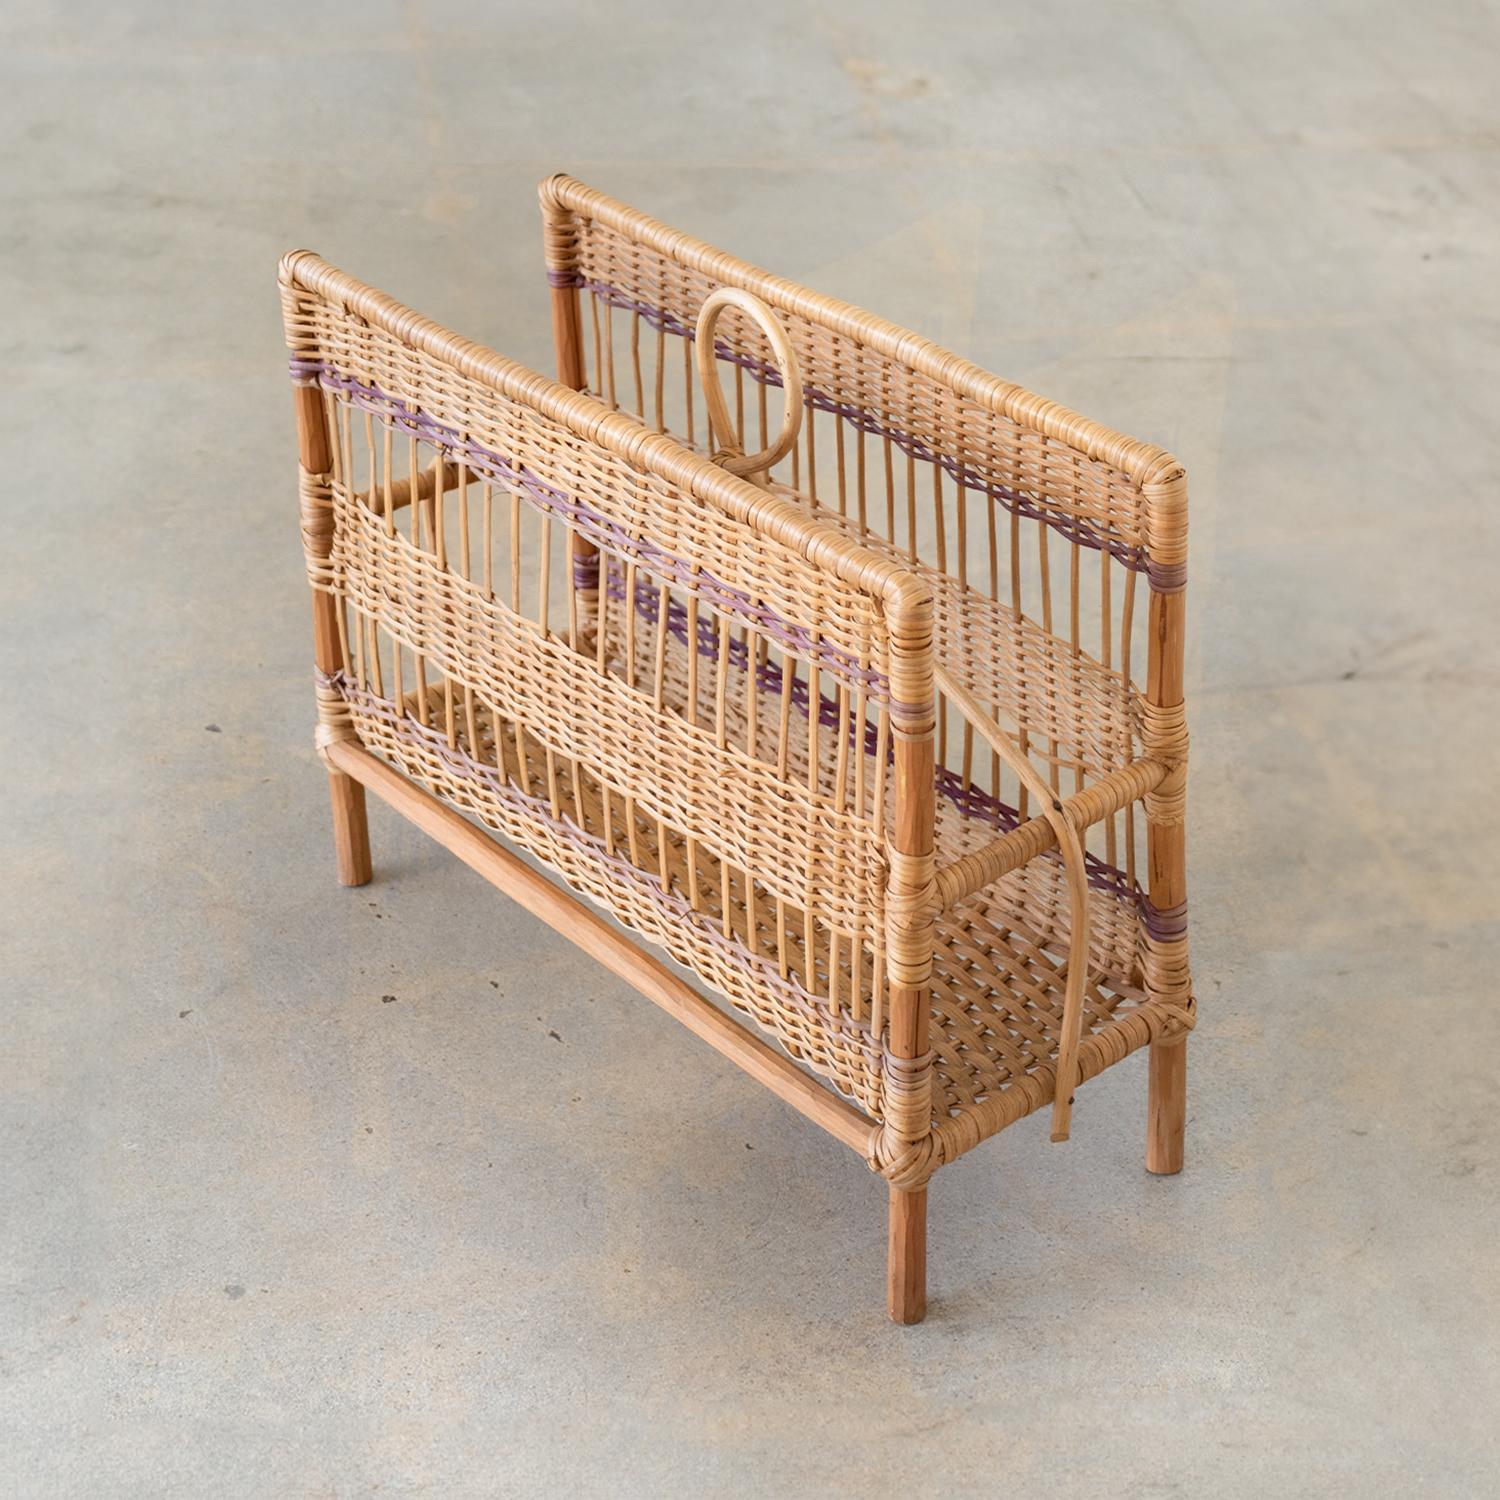 Beautiful wicker and bamboo magazine rack from France, 1960s. Looped rattan handle detail and original woven wicker sides. Nice age and patina throughout.